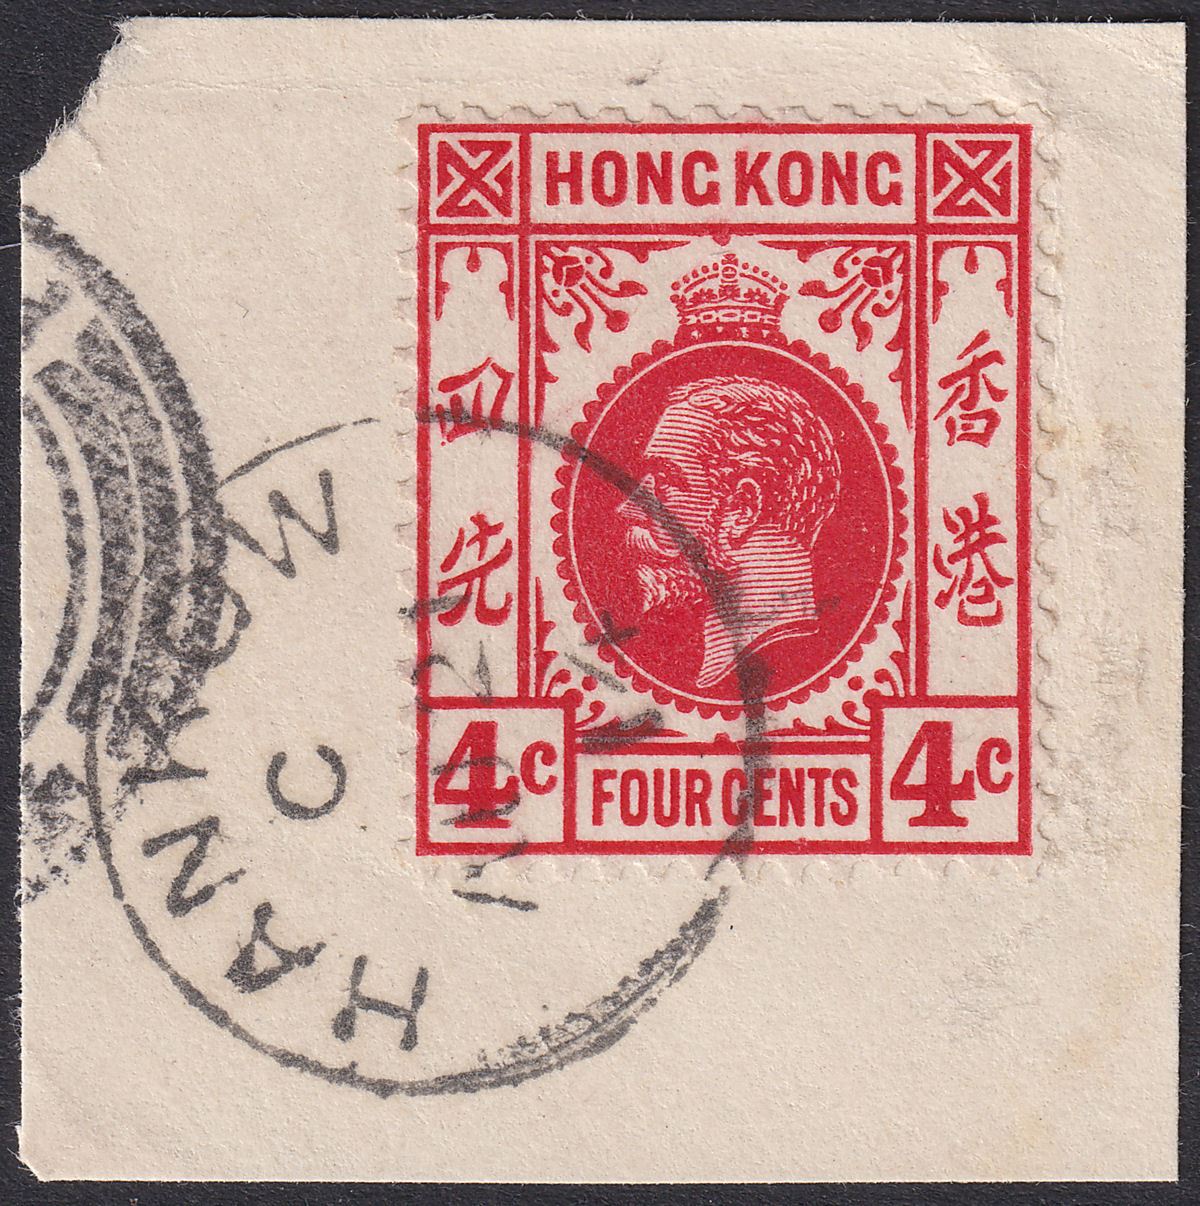 Hong Kong 1914 KGV 4c Red Used on Piece with HANKOW code C Postmark SG Z515